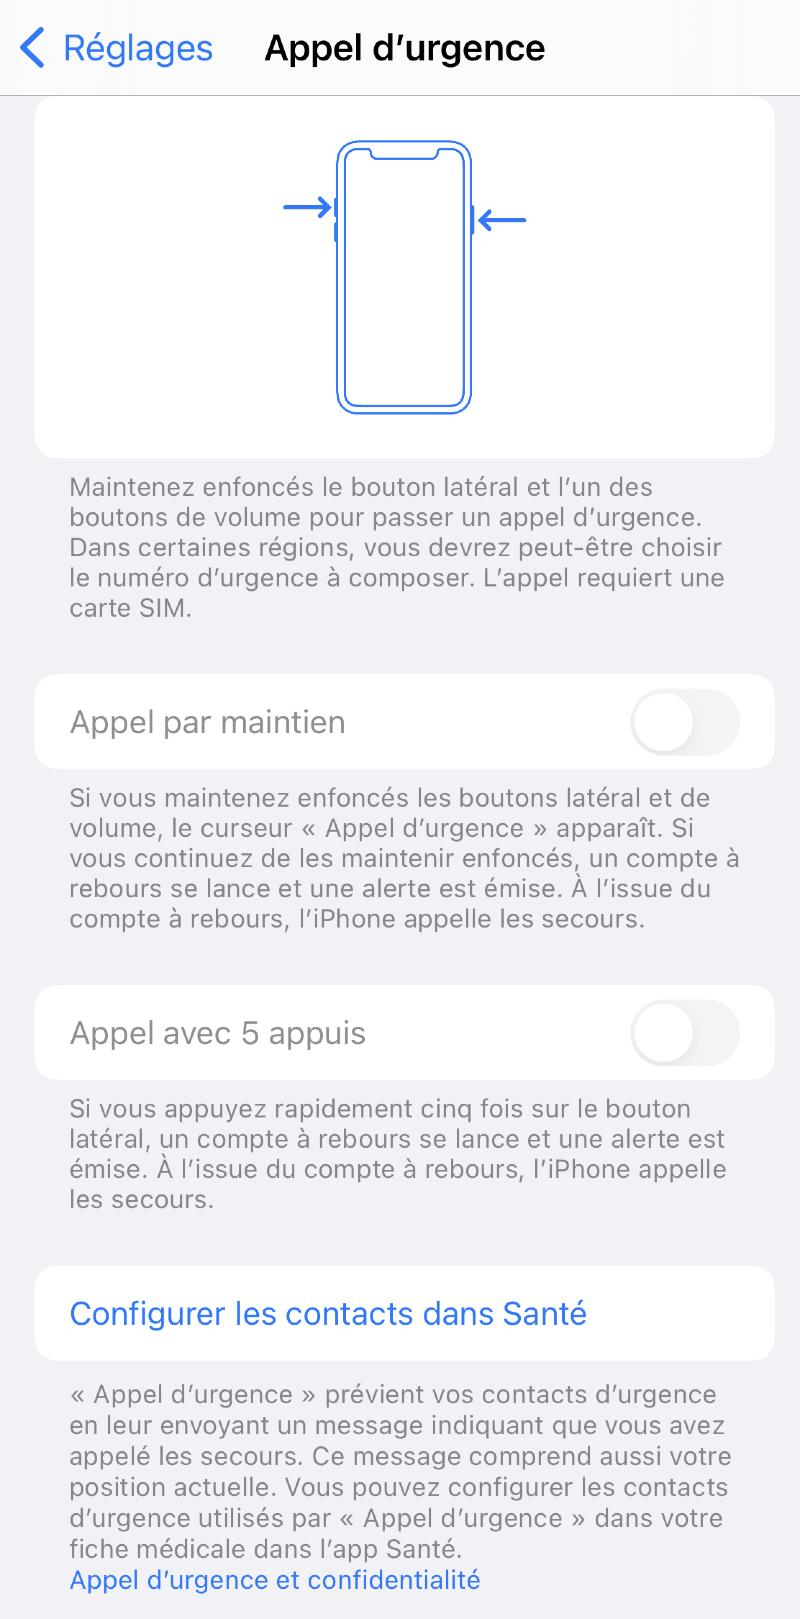 iOS 15.2: confidentiality report, emergency functions, SAFETY communication (blurring photos in messages)